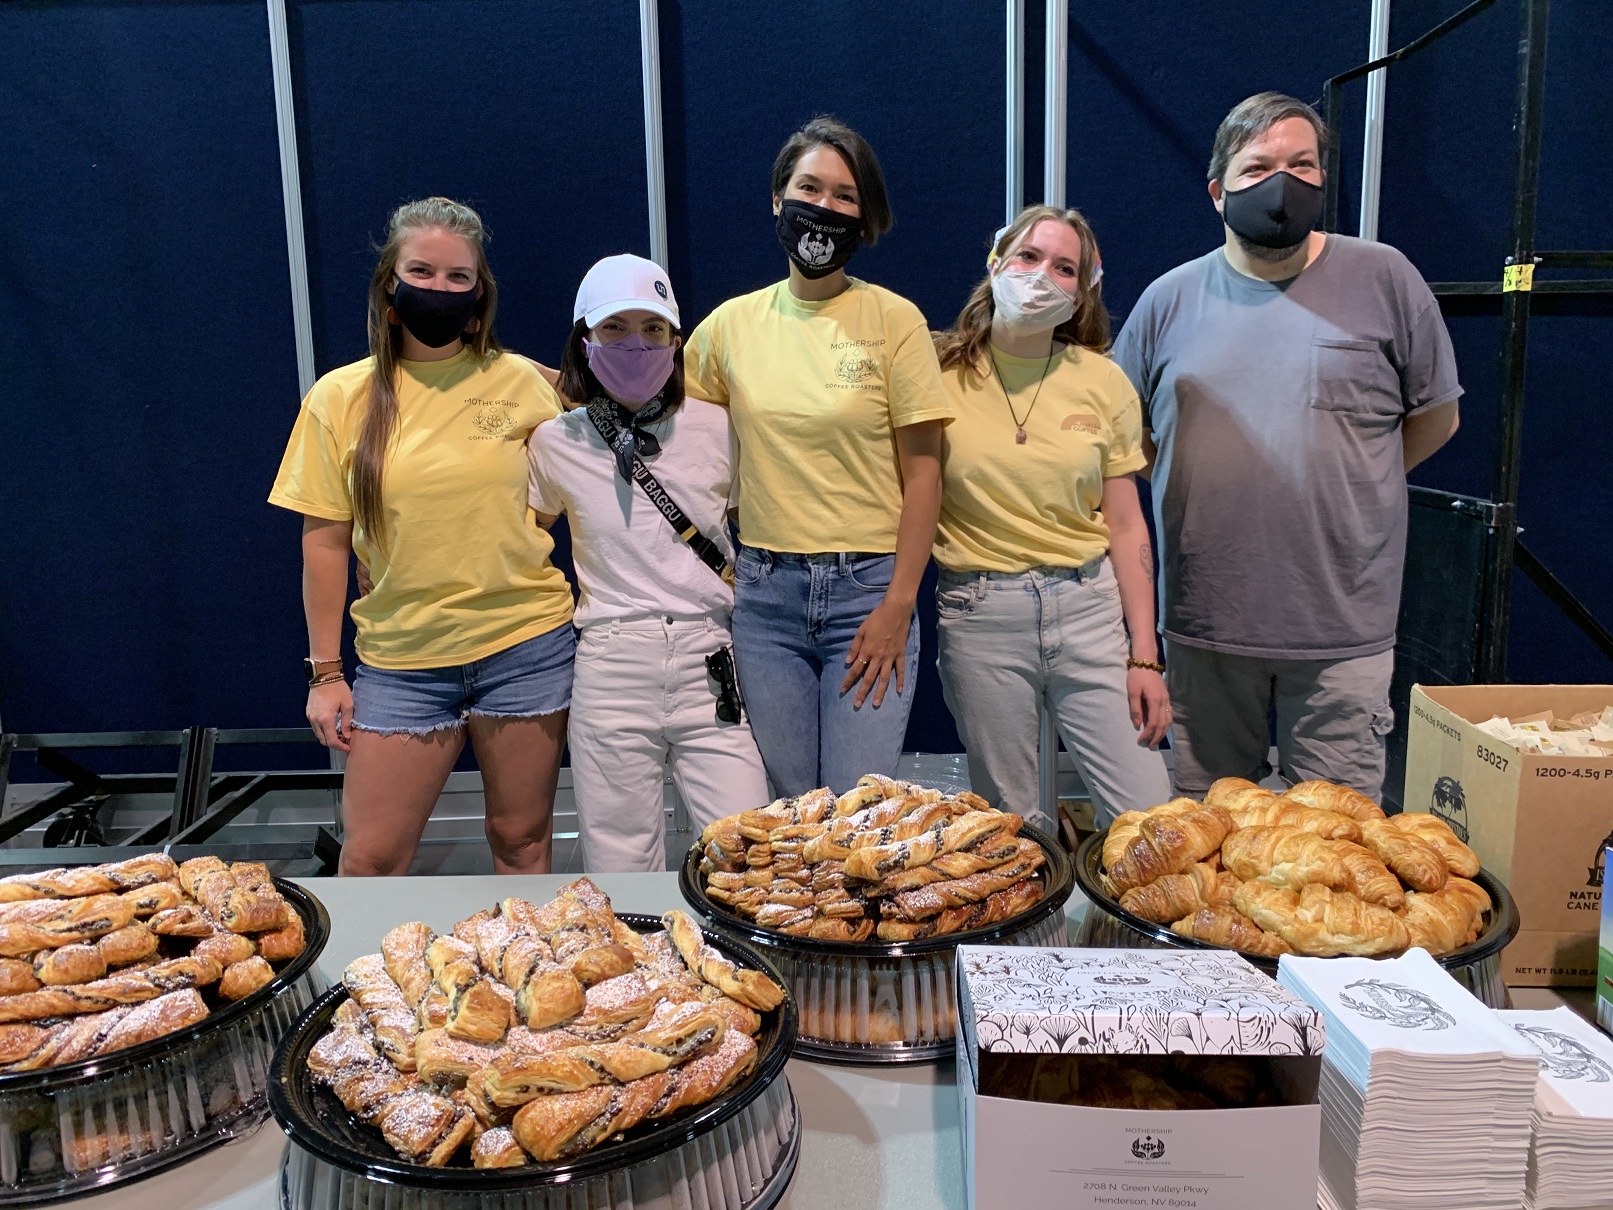 UnCommons Shares Appreciation – and Treats! – with Staff and Volunteers at Valley’s Vaccination Center